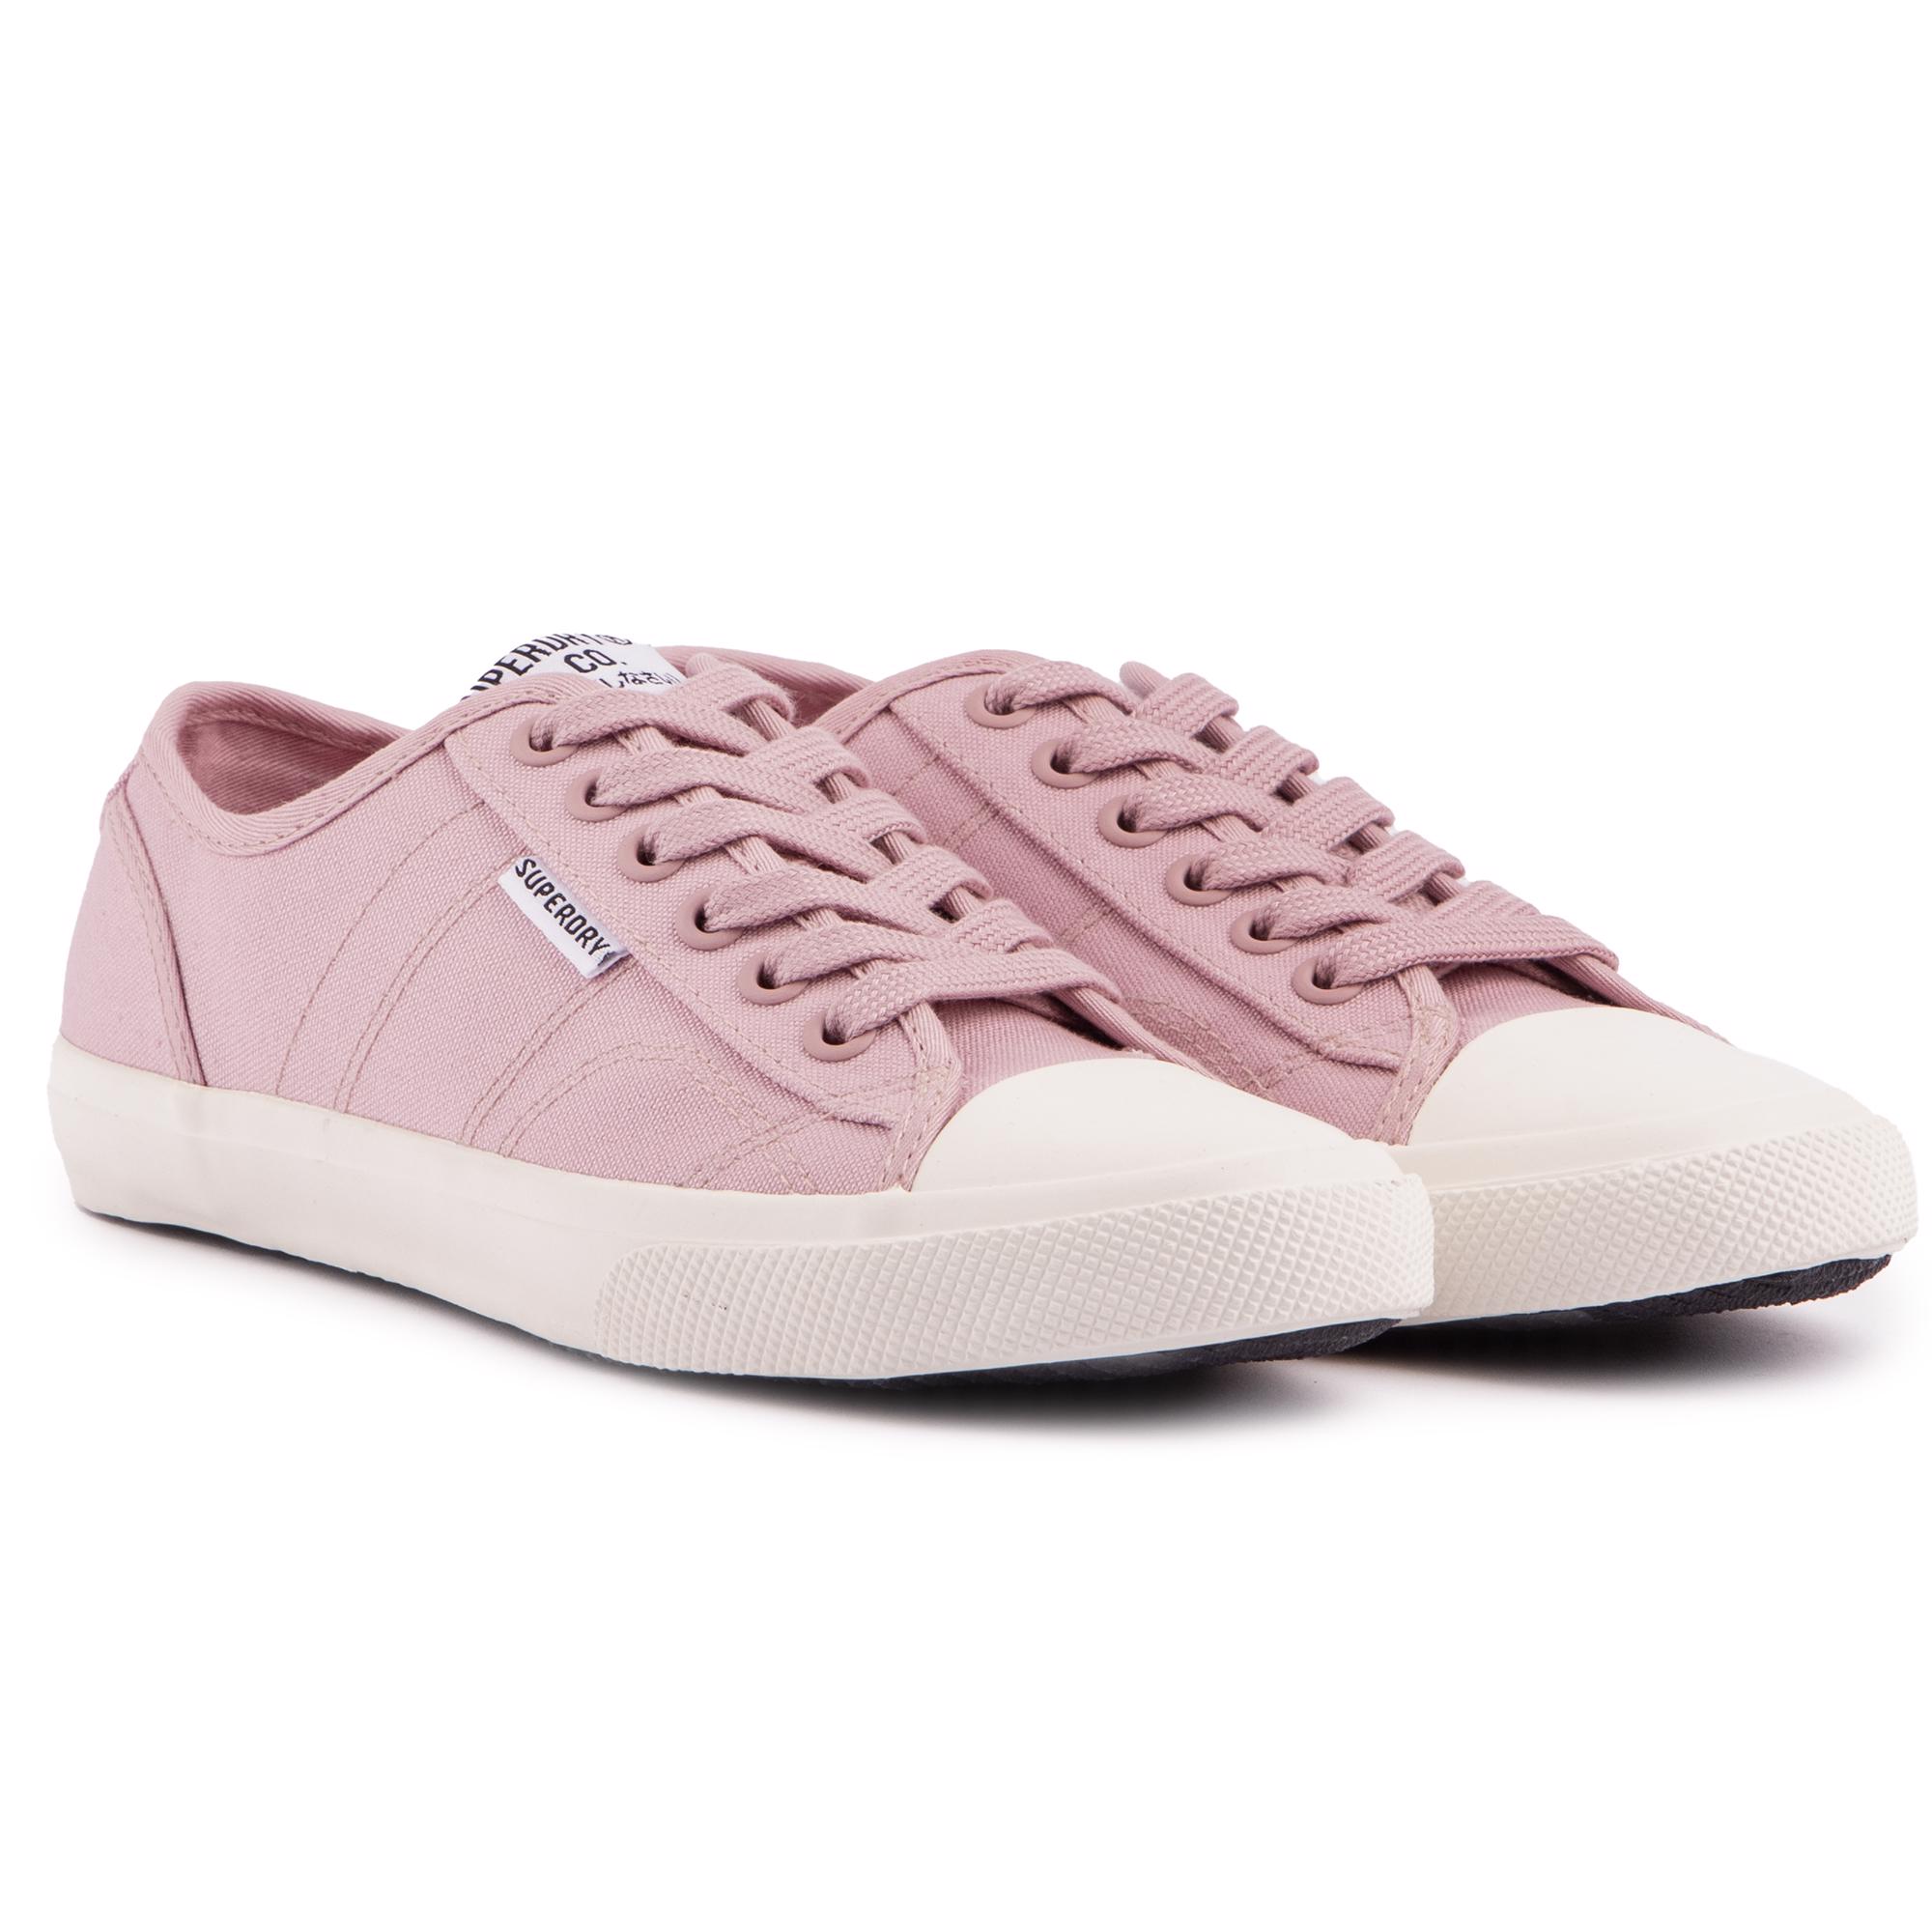 SUPERDRY Womens Classic Low Pro Vegan Plimsolls Trainers Pink